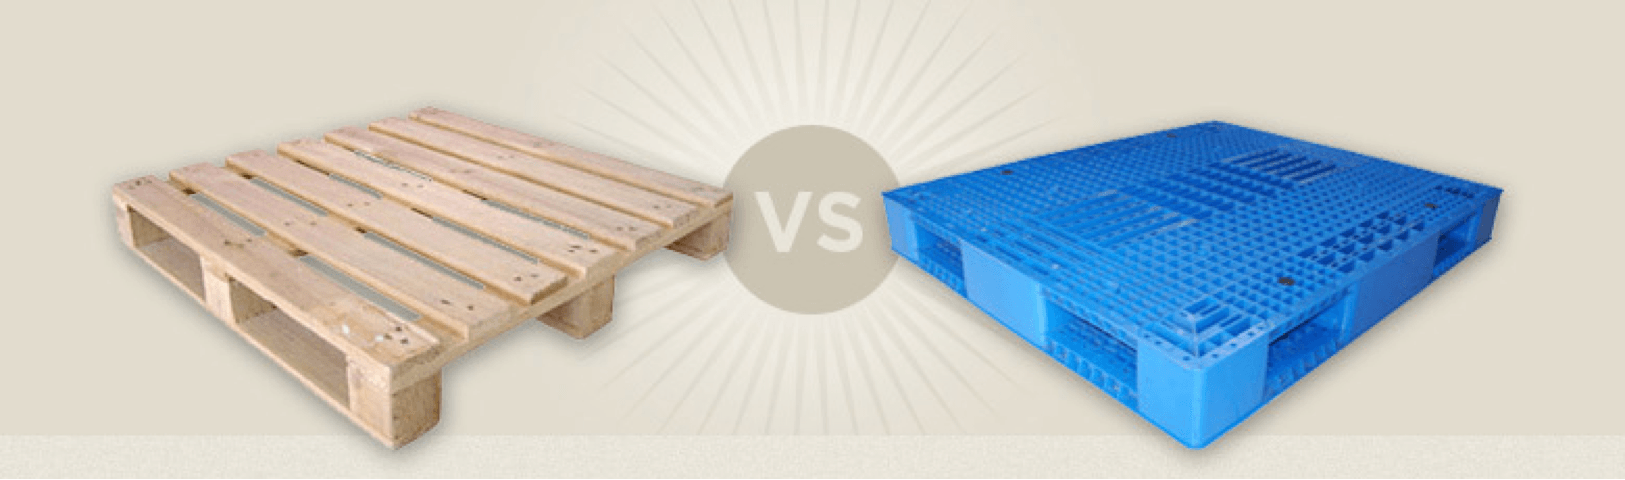 What is Better Wood or Plastic Pallets? The Pros and Cons.